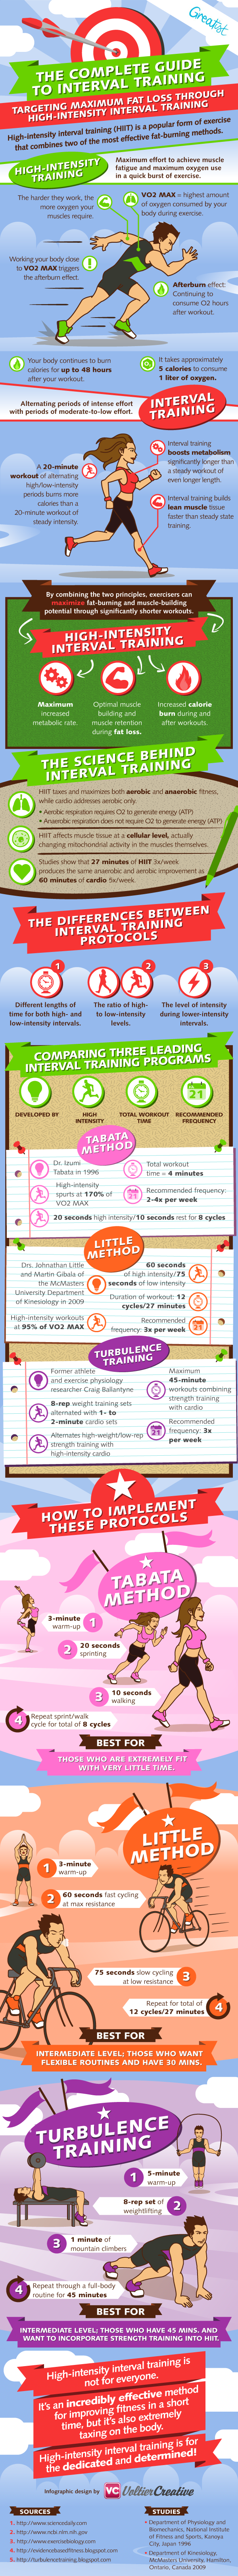 High Intensity Interval Training (HIIT) – a great infographic on understanding H